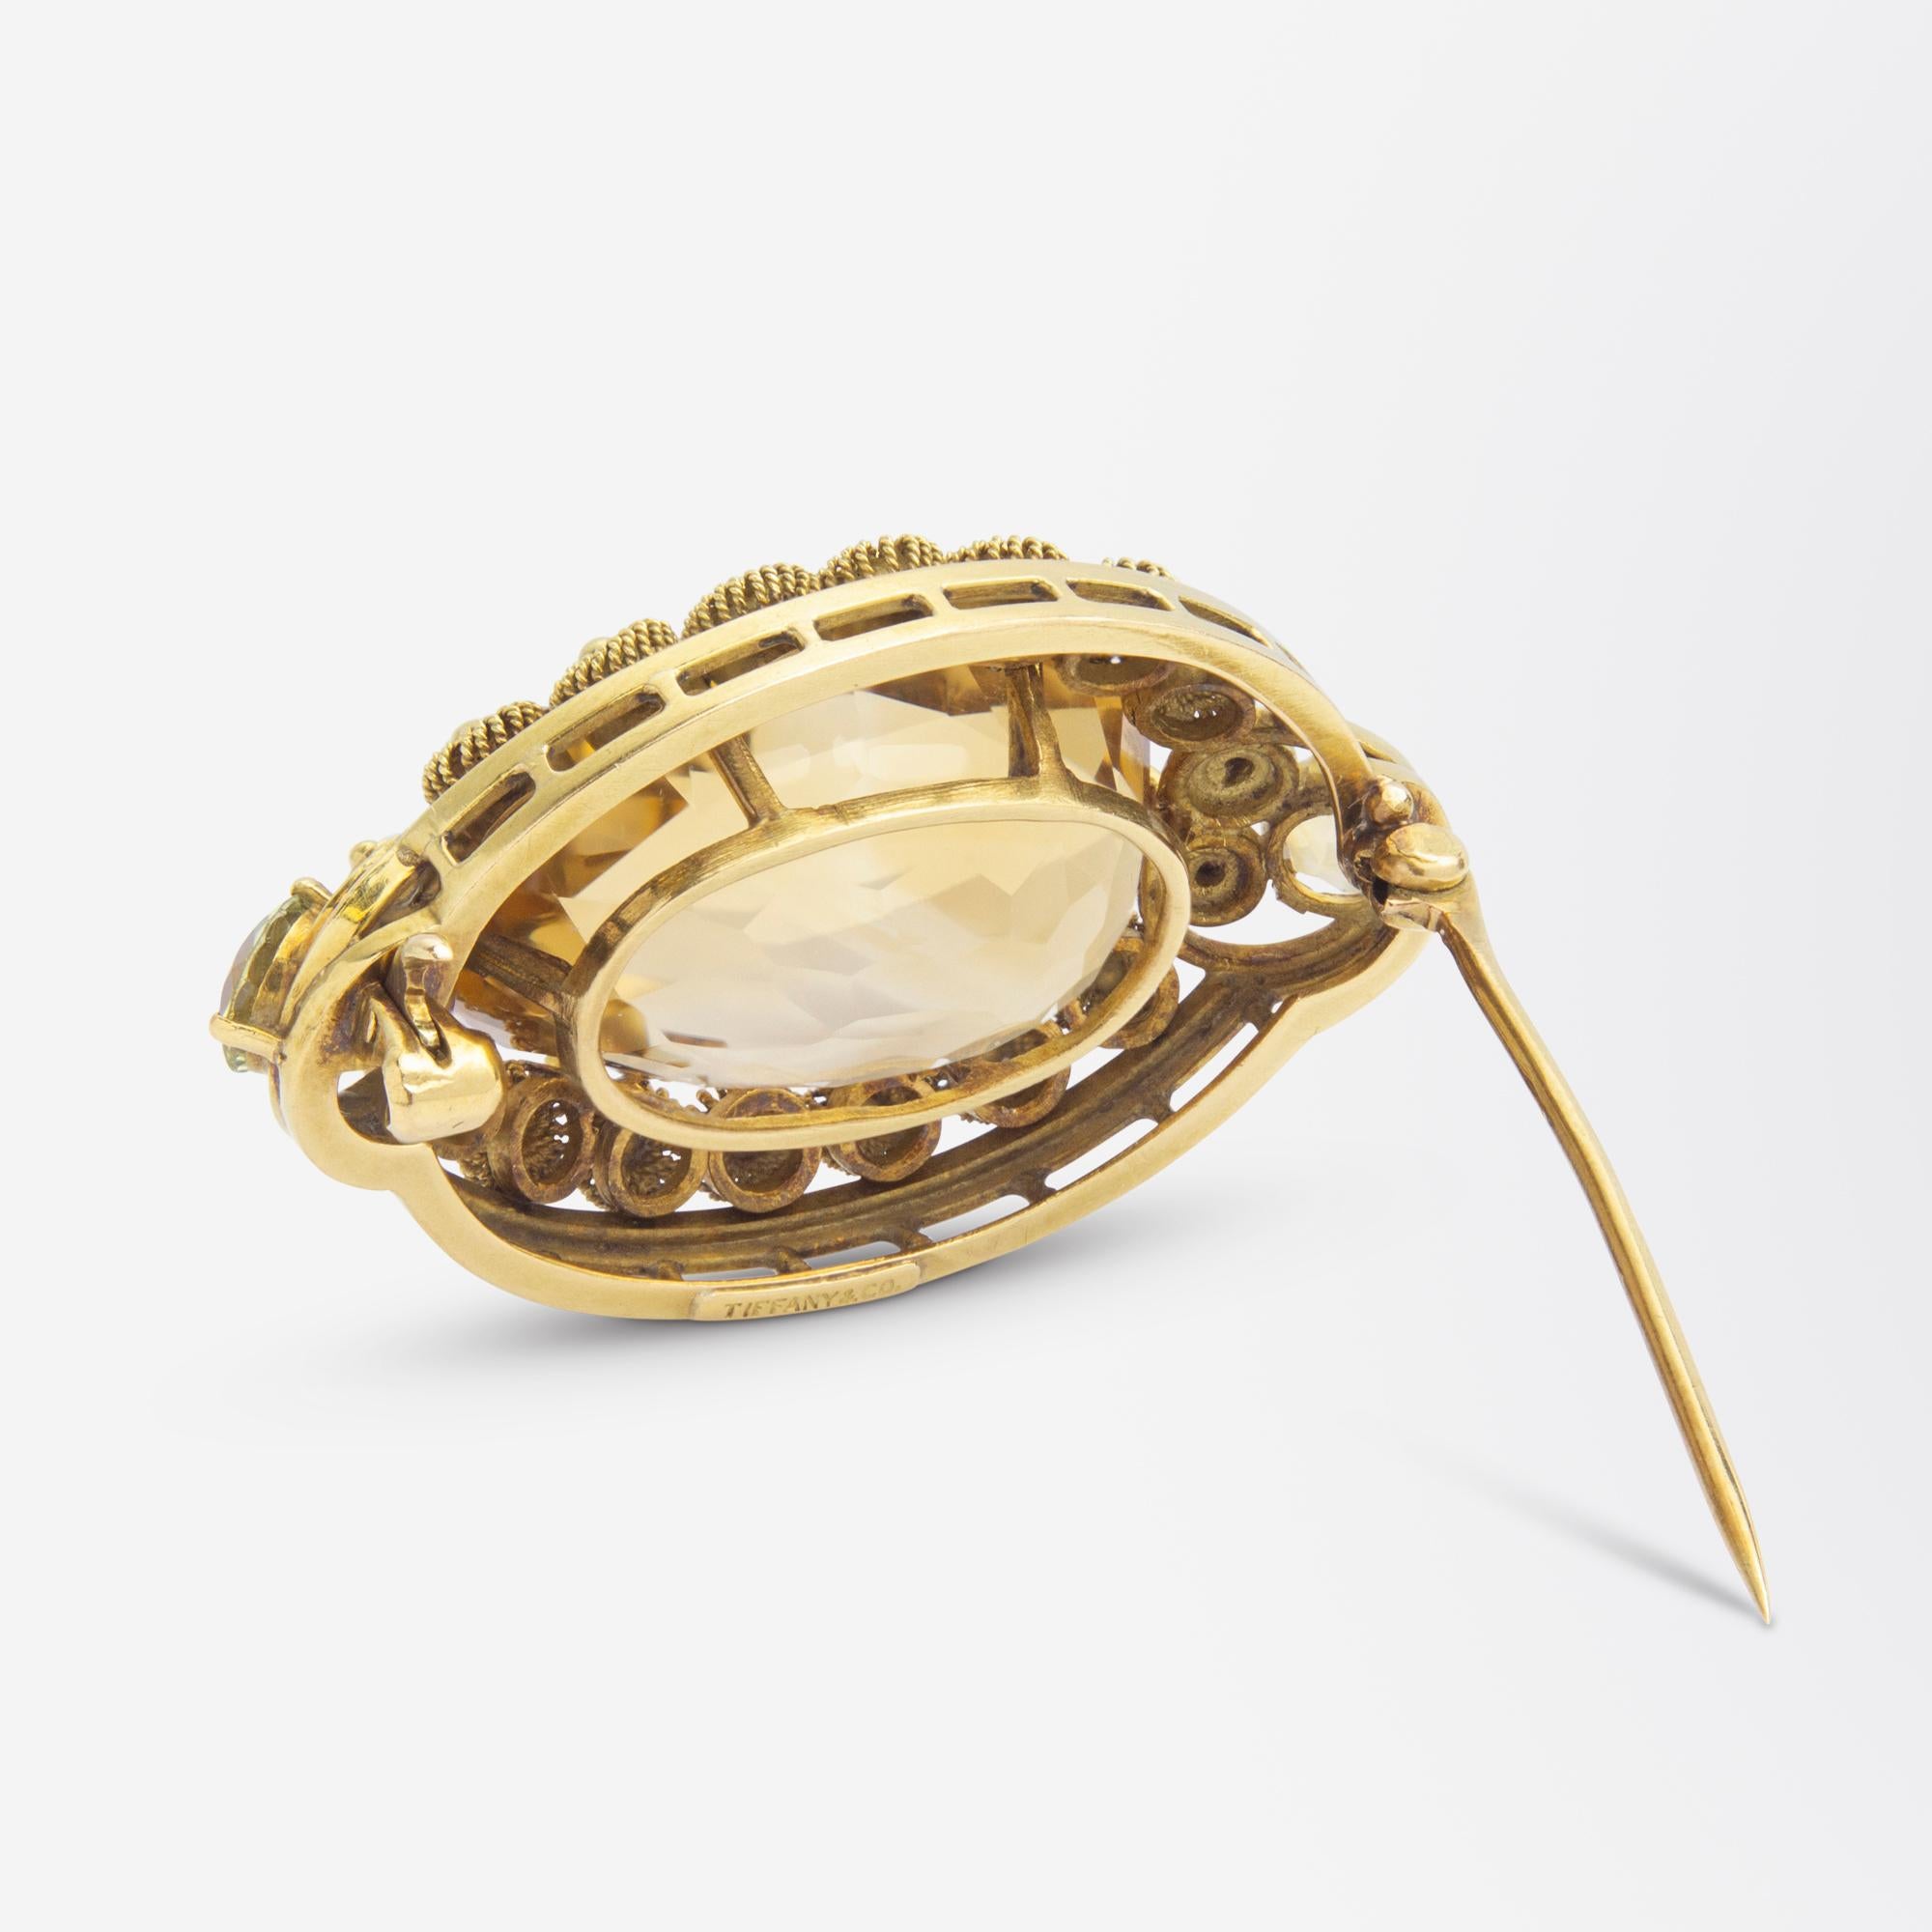 Oval Cut Rare Louis Comfort Tiffany Citrine Brooch For Sale